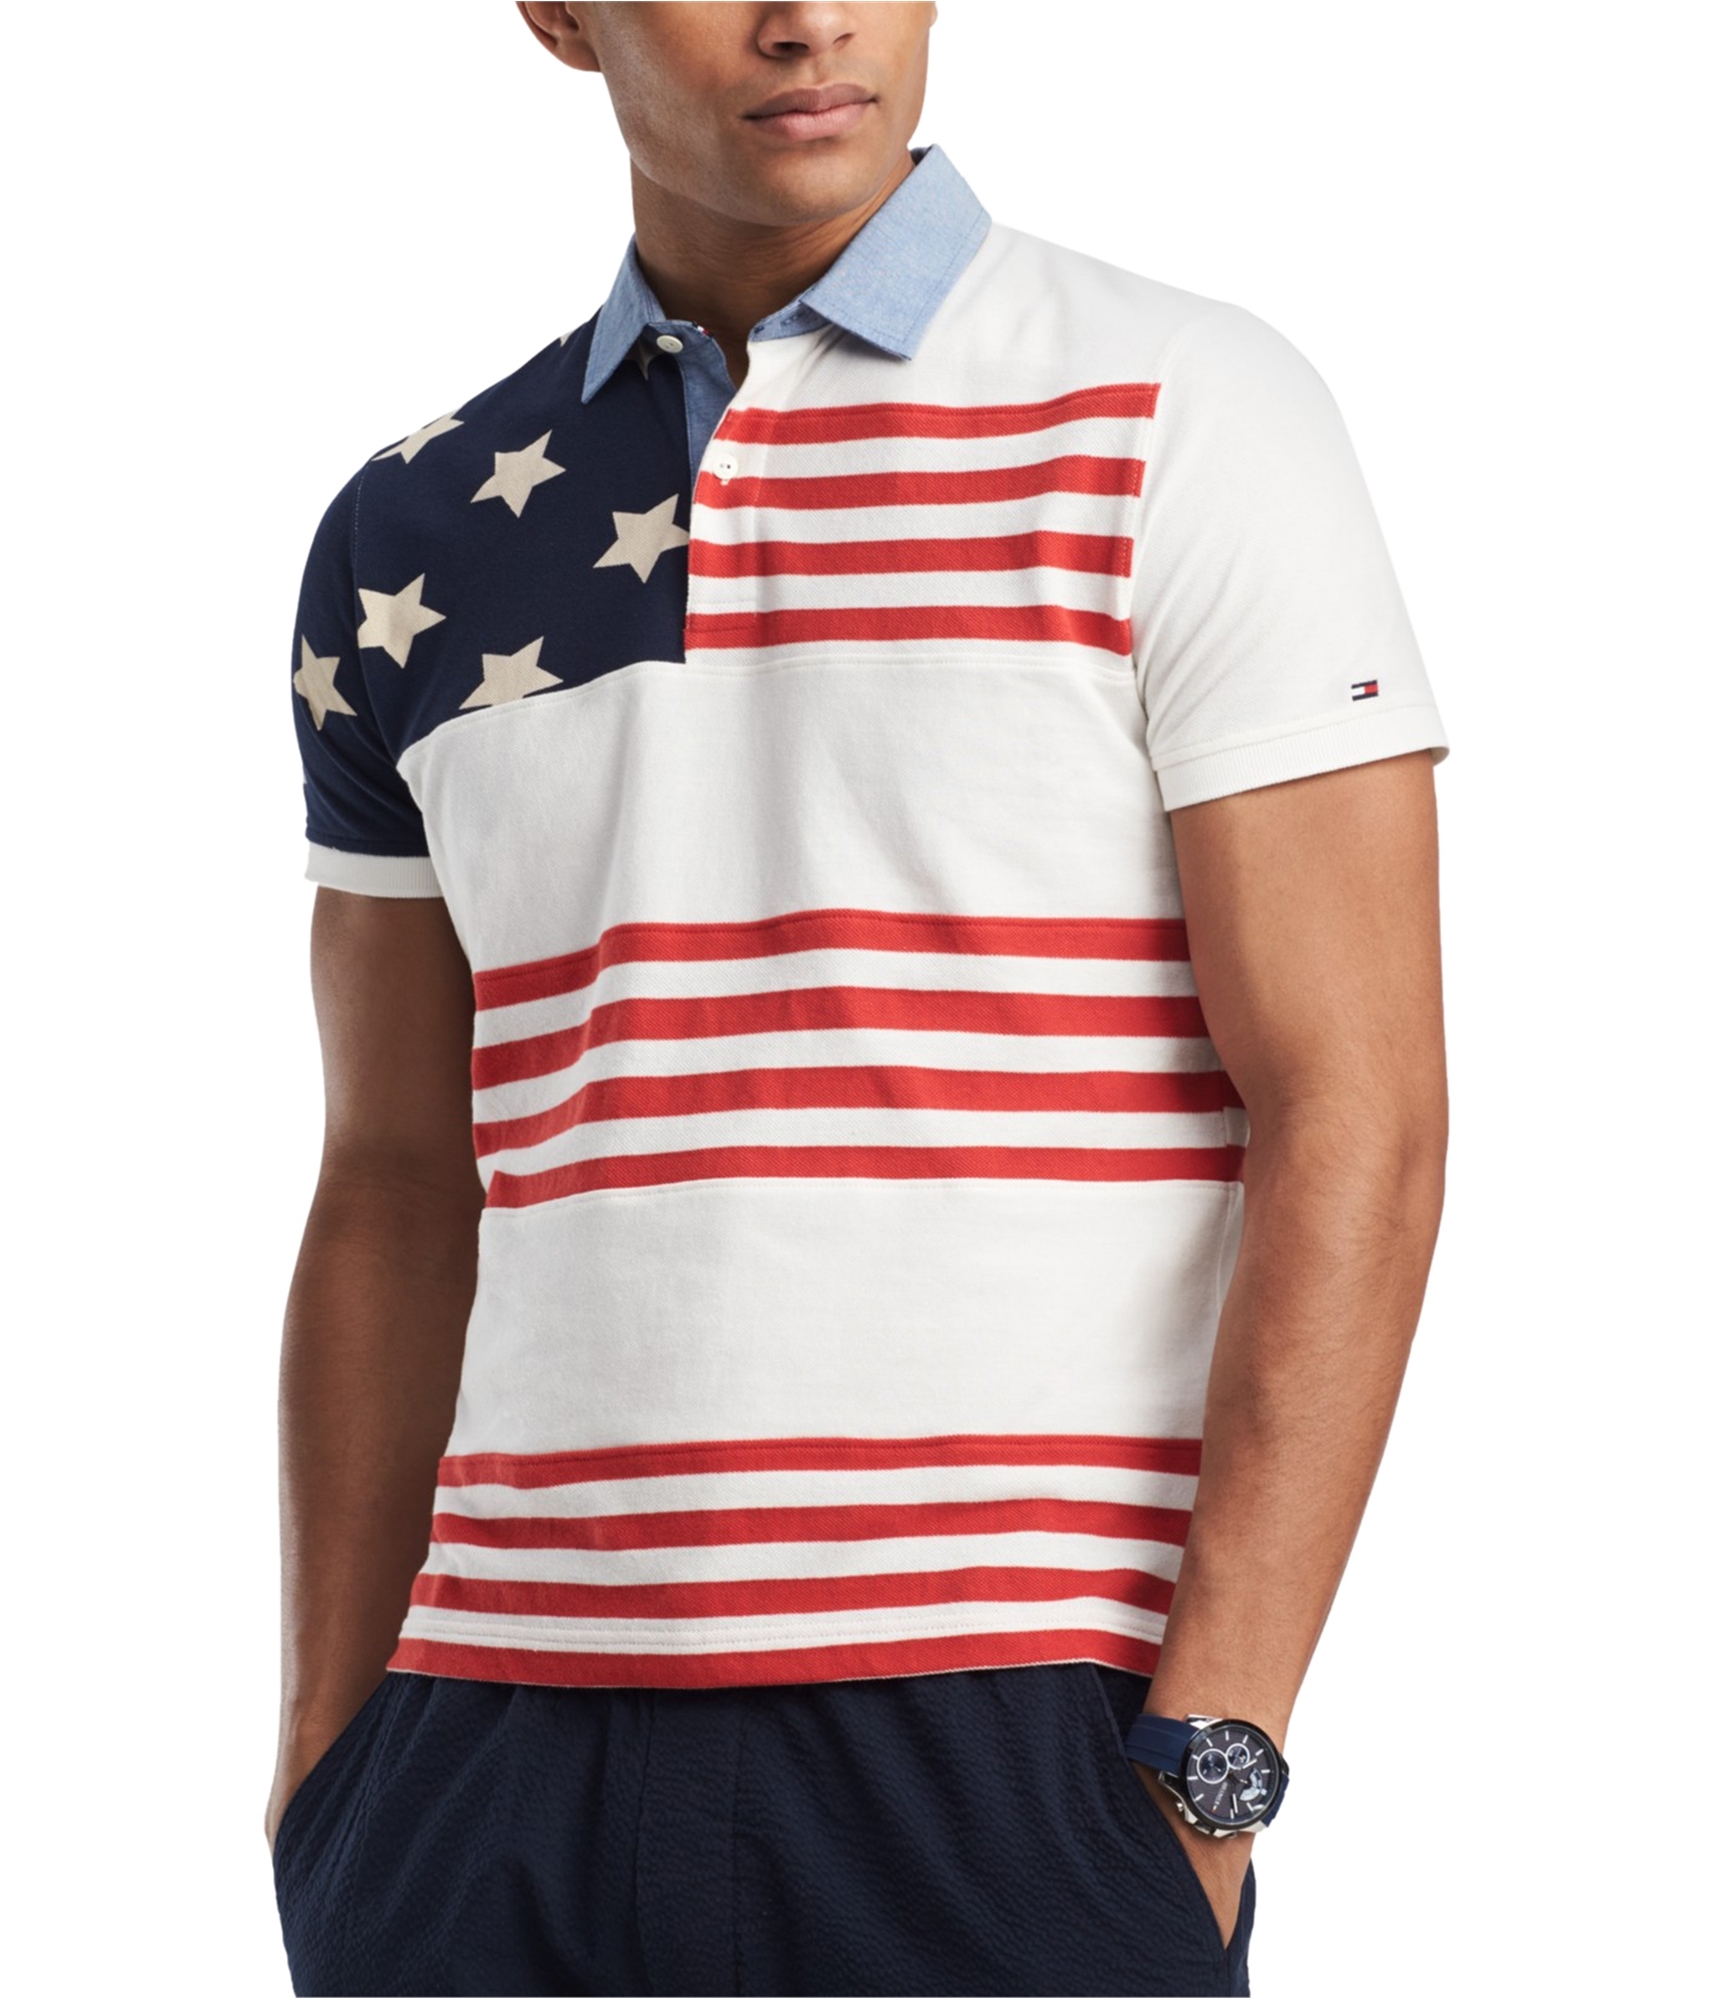 Buy a Mens Tommy Hilfiger Rugby Polo Shirt Online | TagsWeekly.com